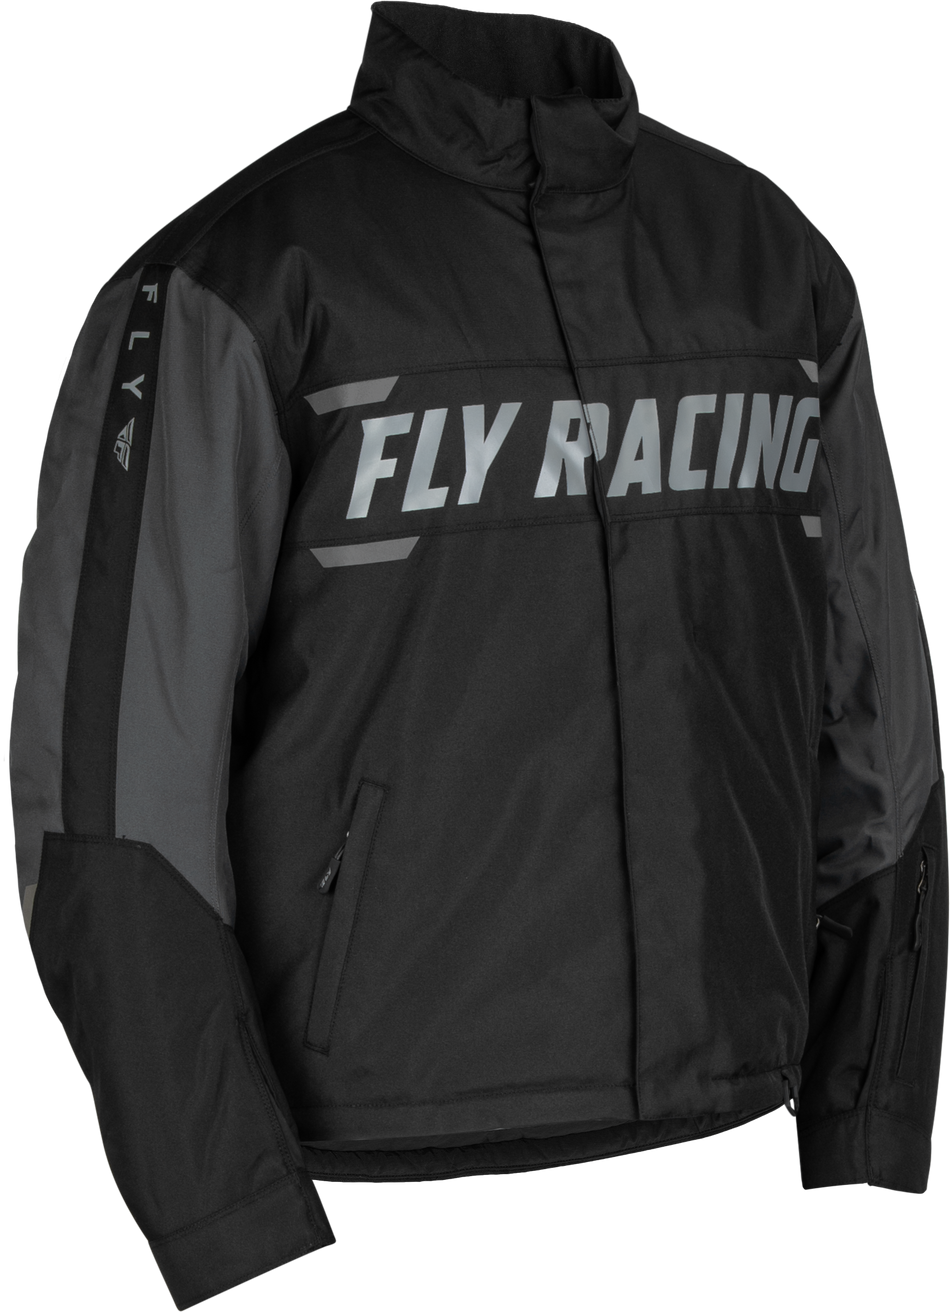 FLY RACING Outpost Jacket Black/Grey Md 470-5500M